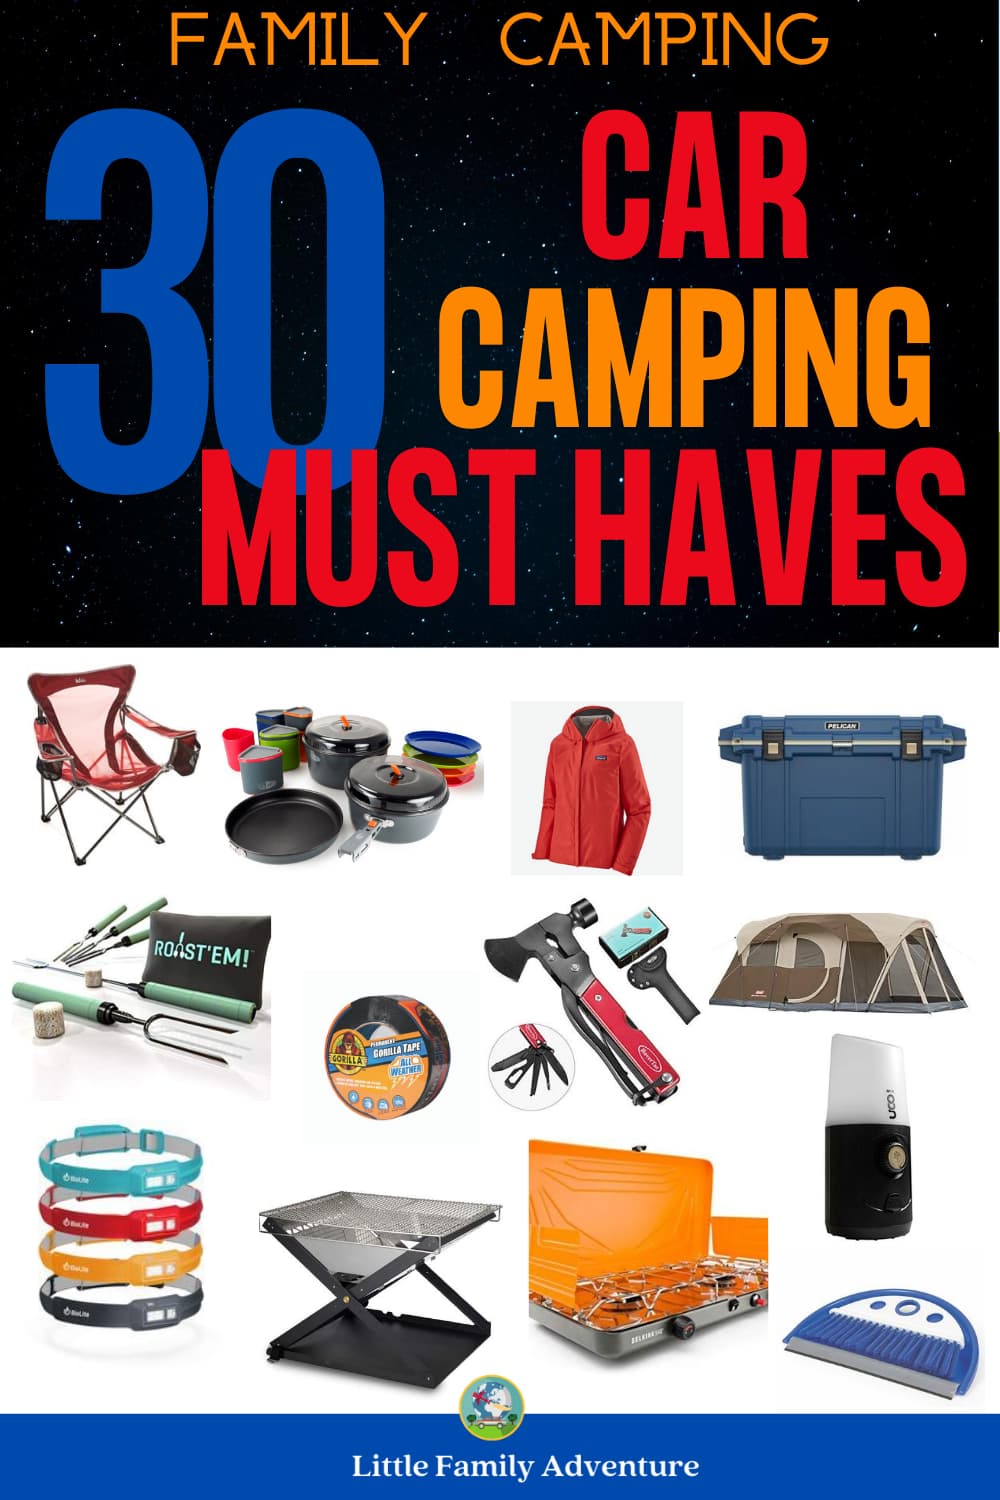 30 Car Camping Must Haves to Help Get Your Family Camping + Checklist